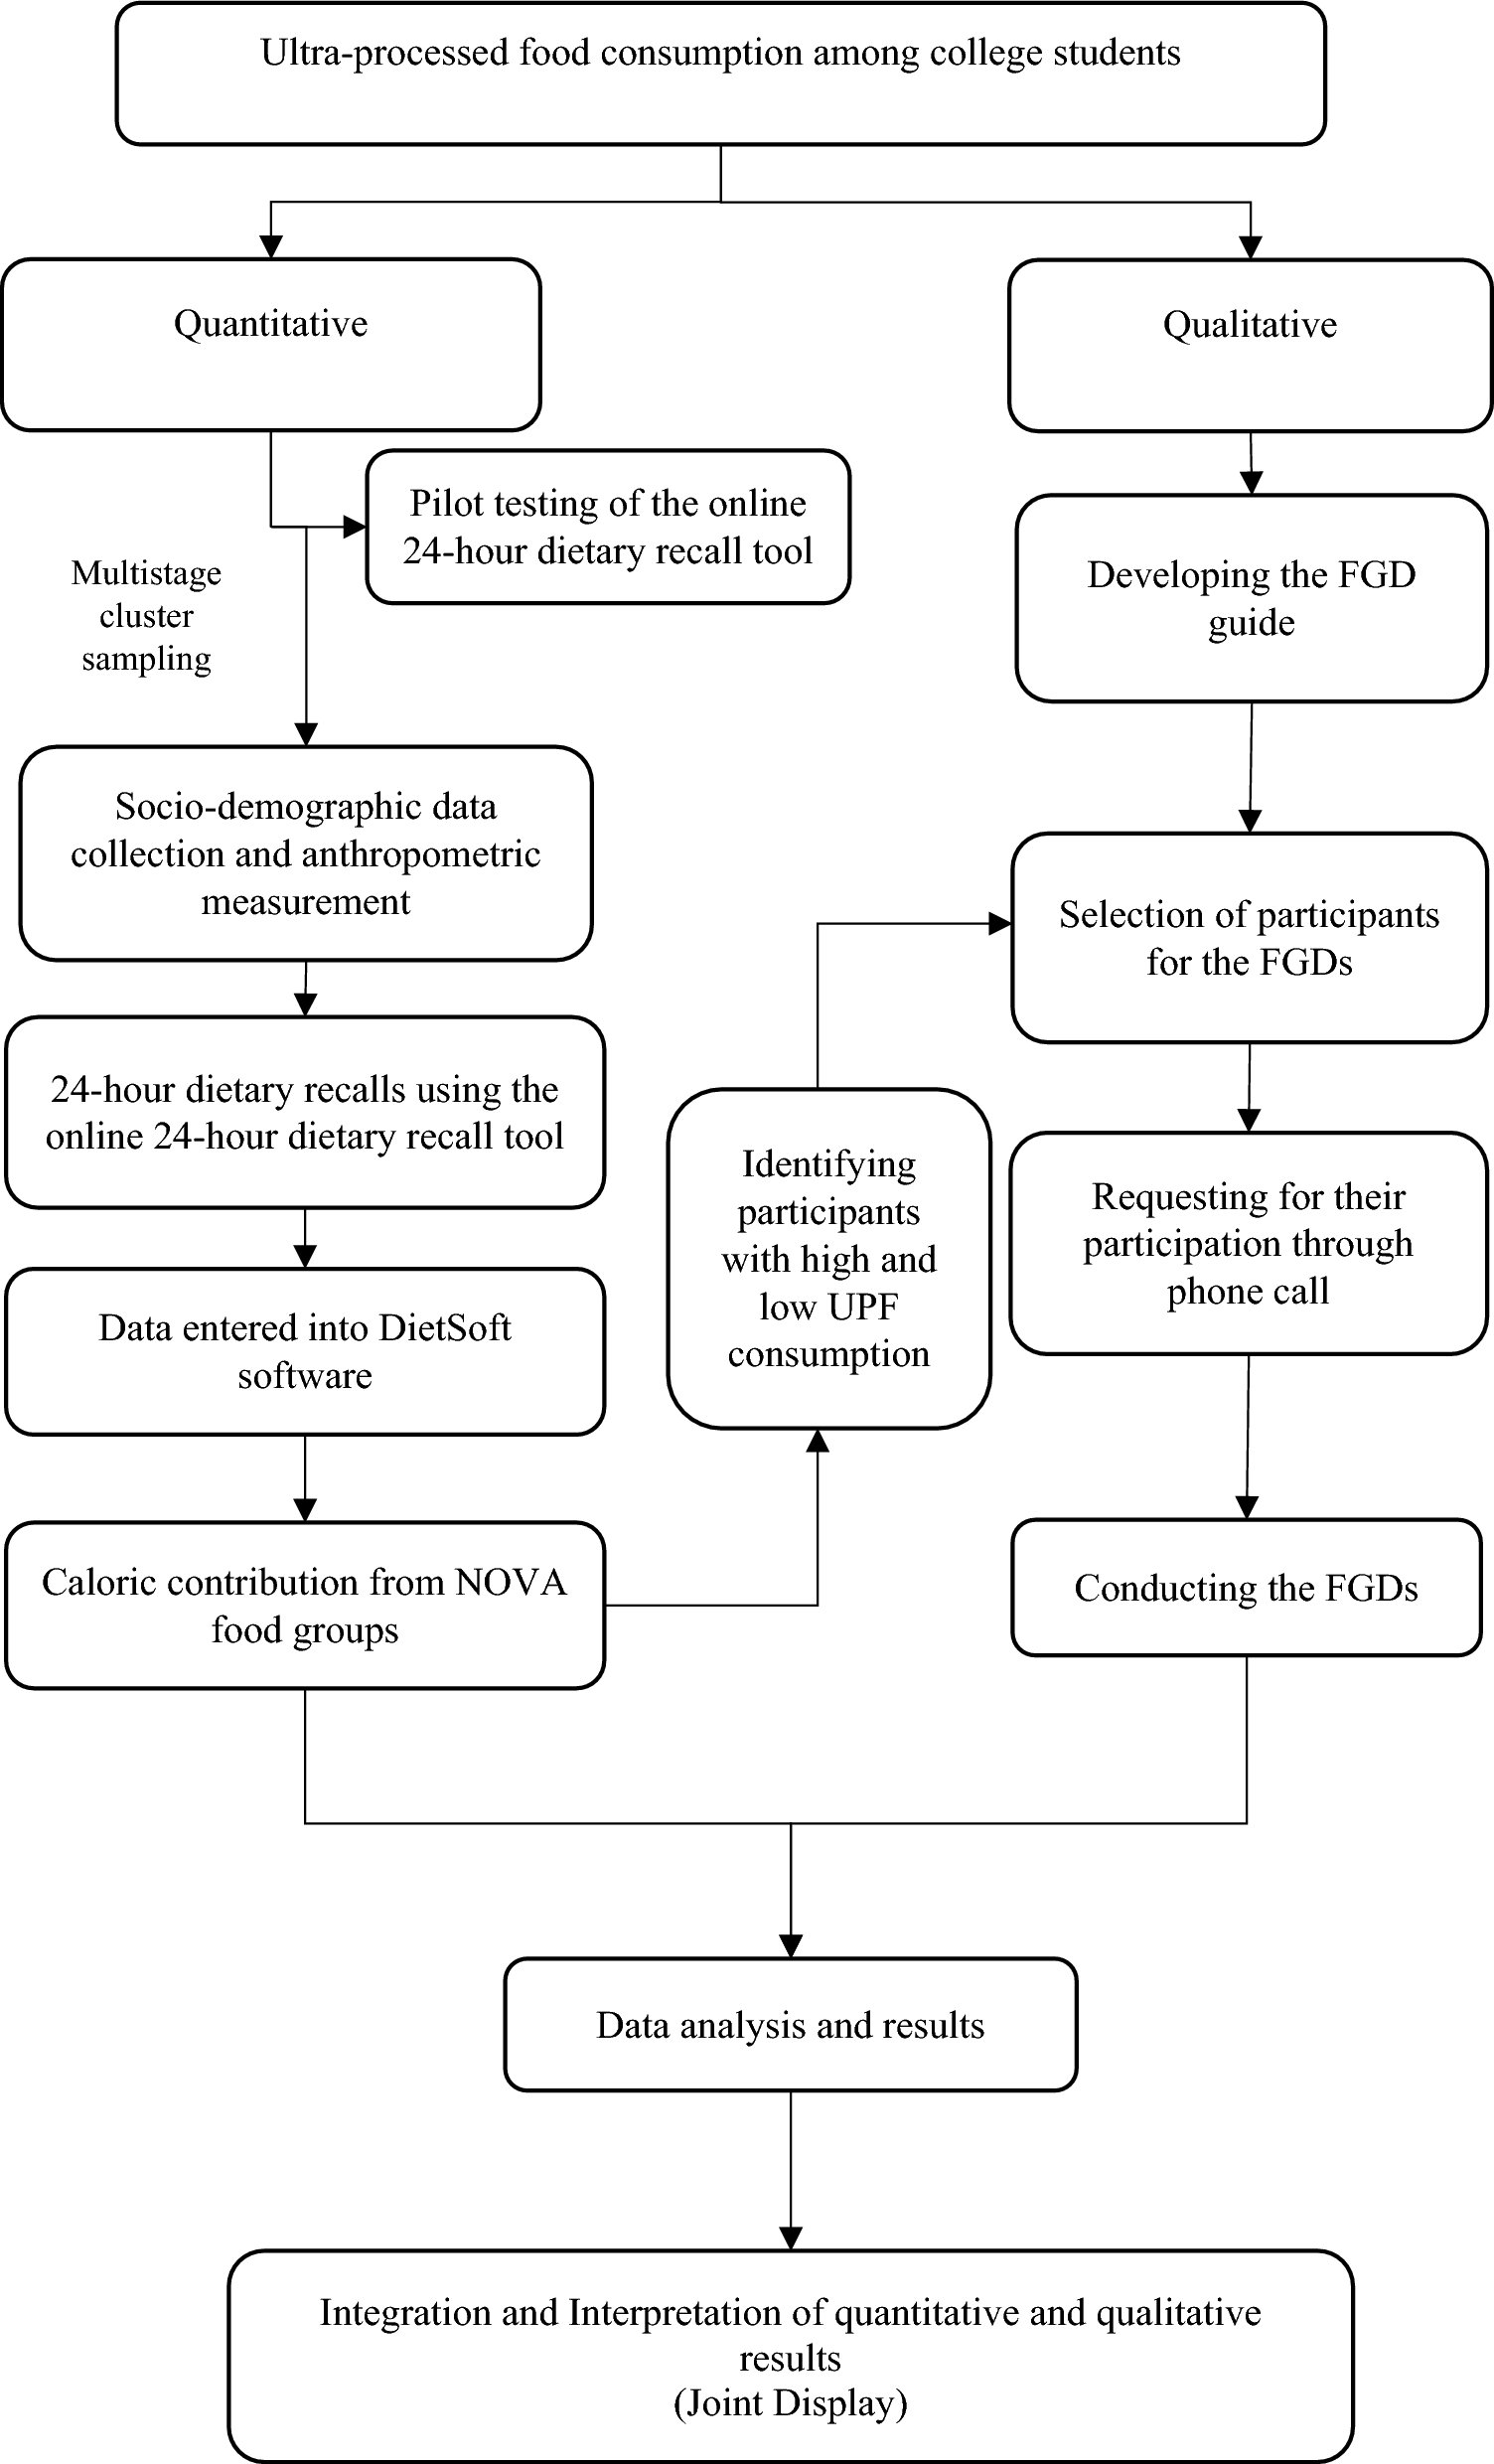 Influence of ultra-processed food in the diet of South Indian young adults: an explanatory mixed method study